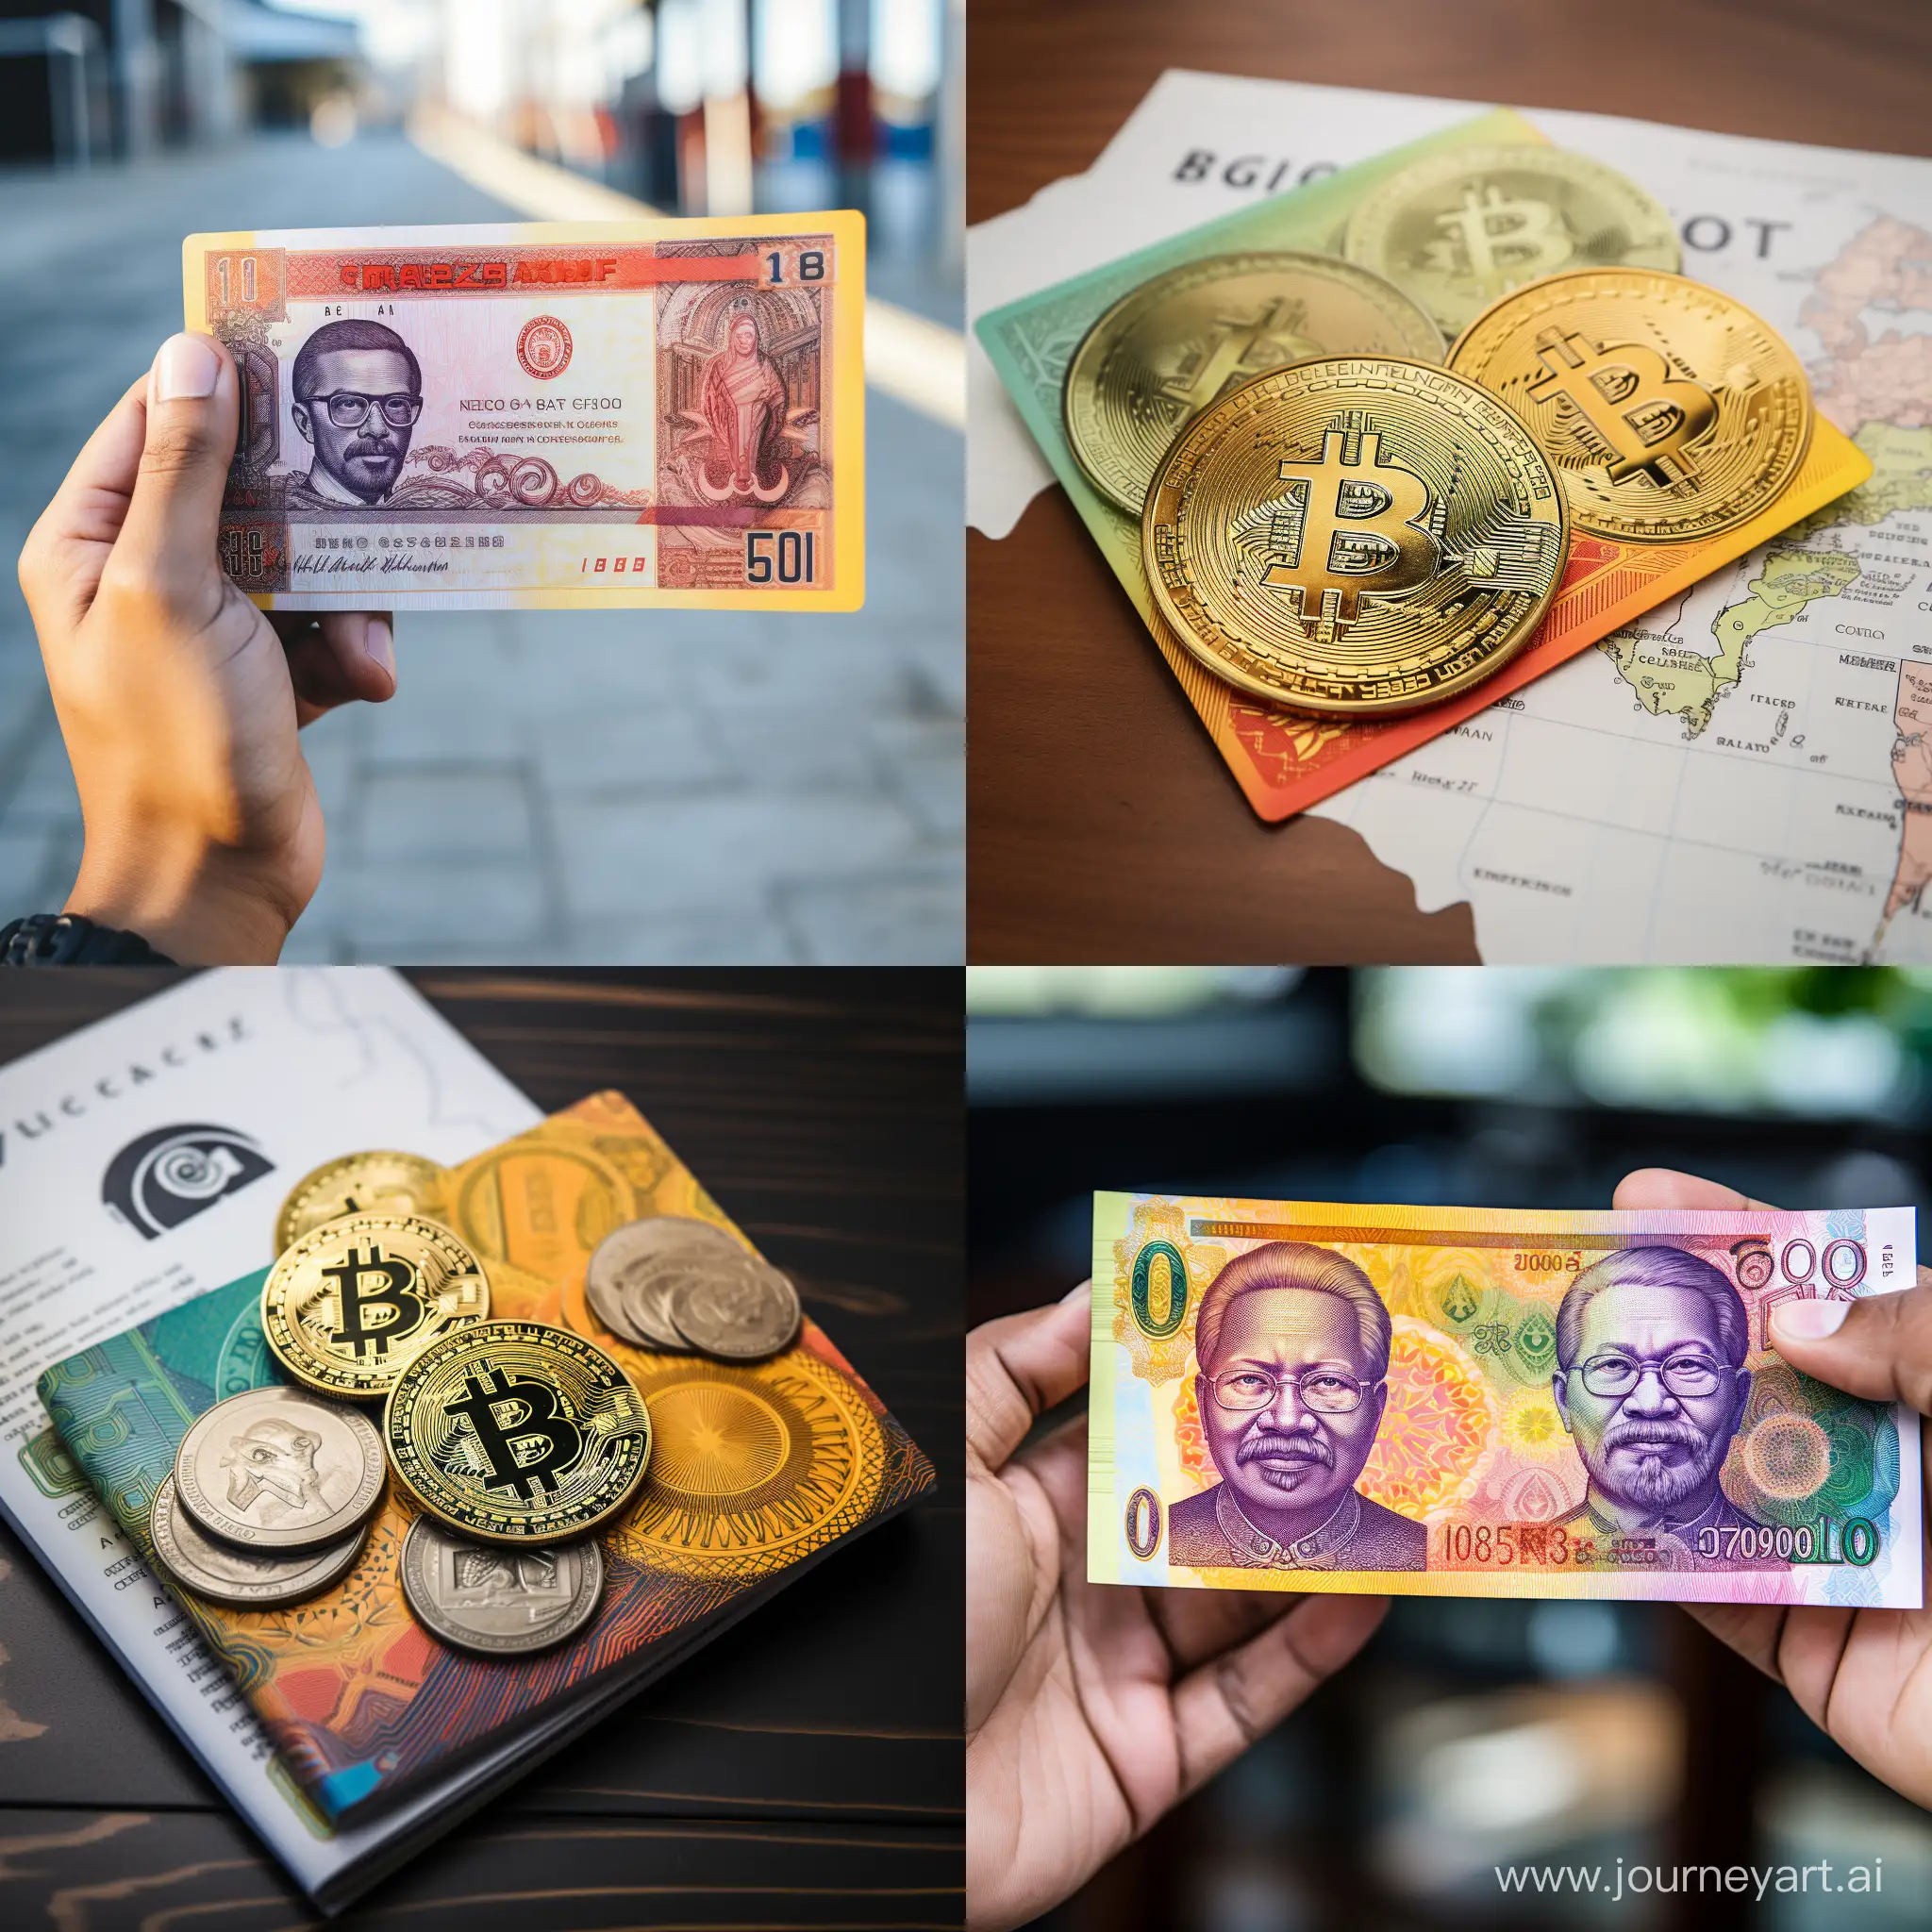 Design a crypto note for the Brics currency that incorporates these features: advanced trackable and immutable anti-counterfeiting measures and verification technology, a distinctive brick red color scheme, integration with smart contracts, environmentally sustainable 
practices, and dynamic denominations
